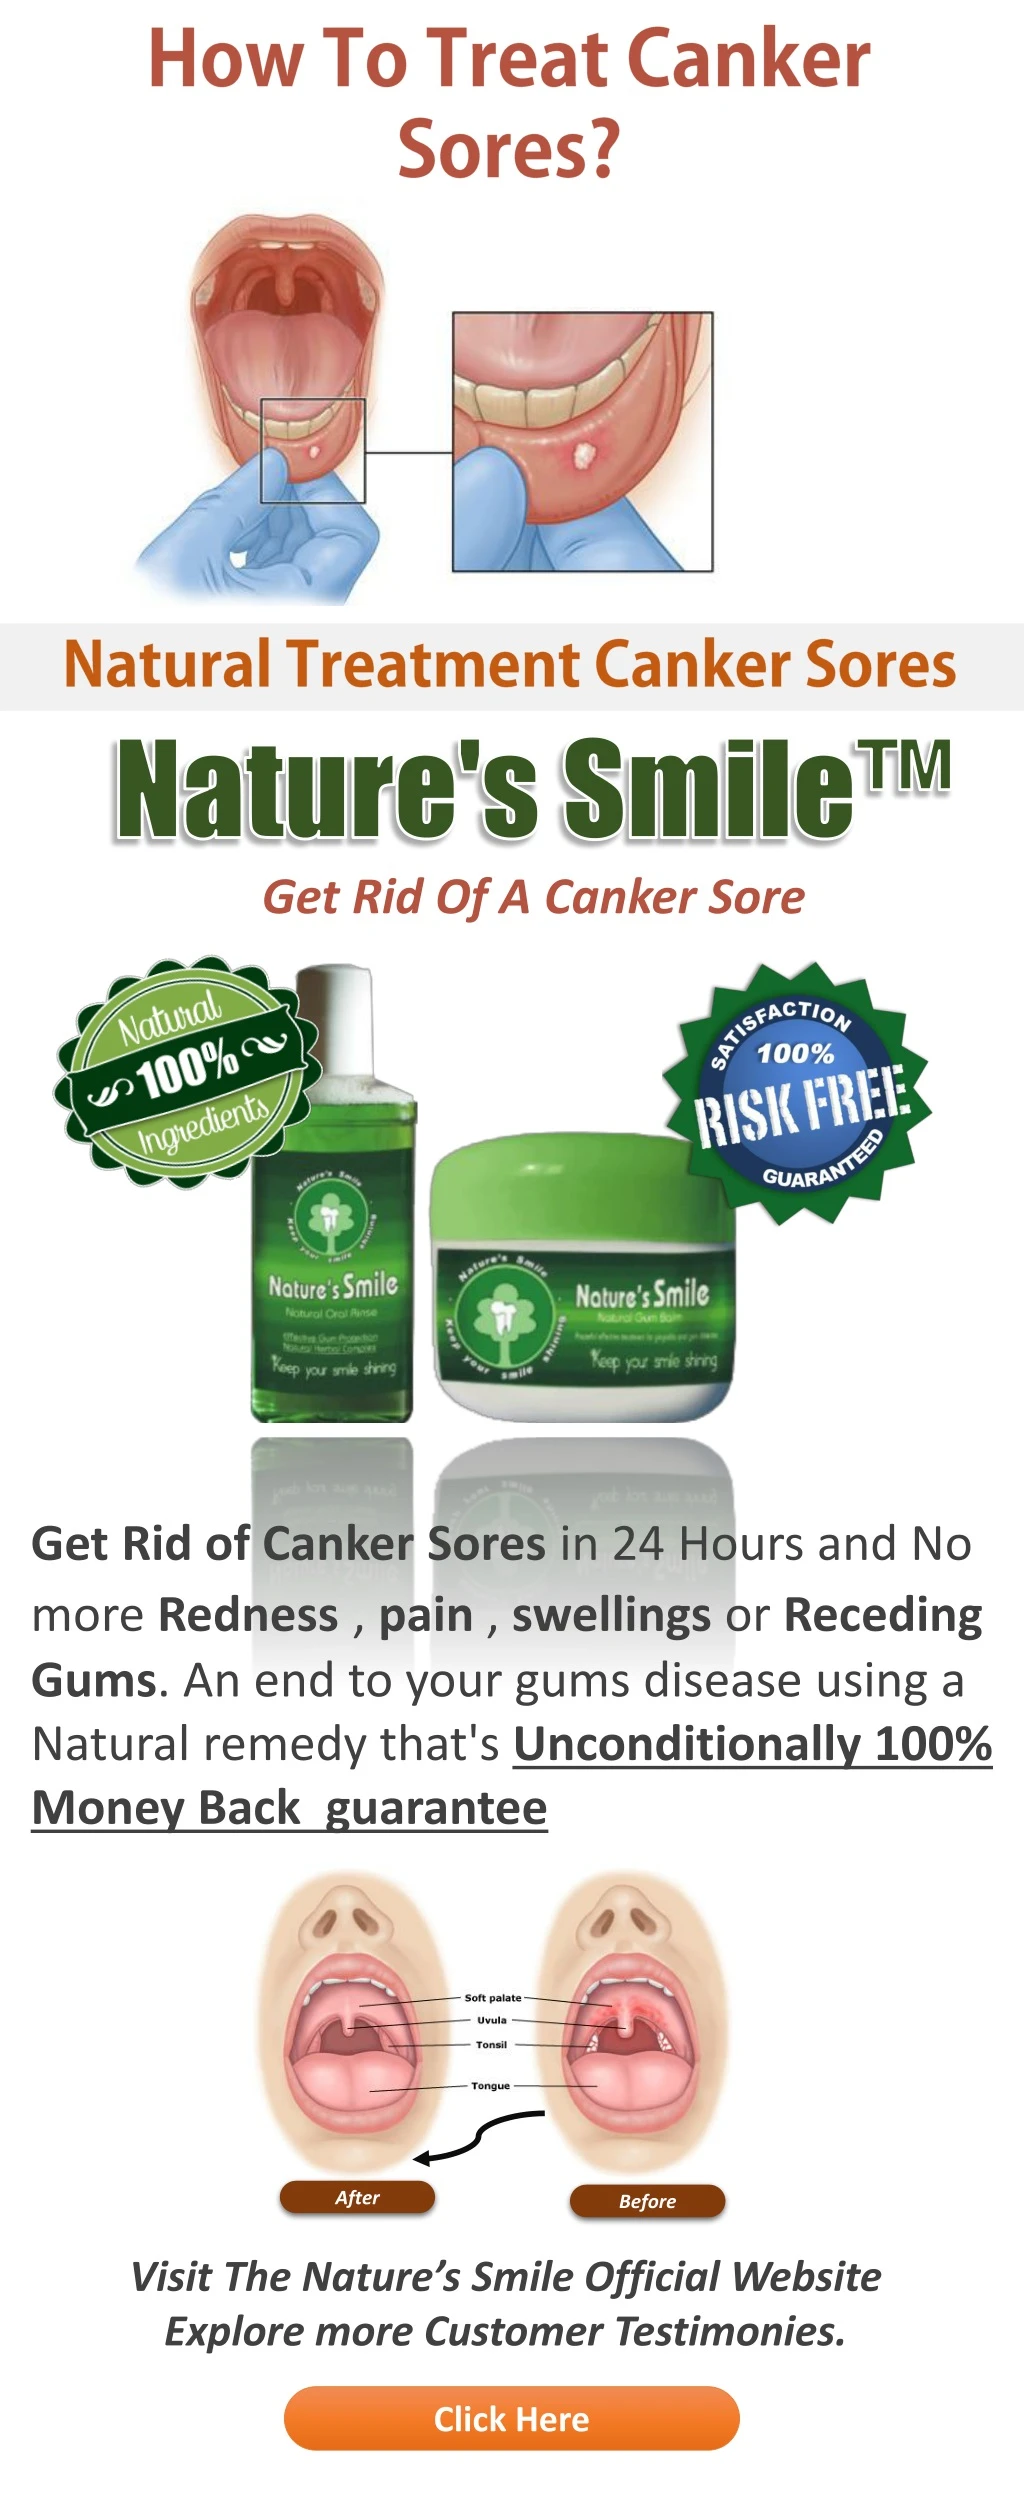 get rid of a canker sore